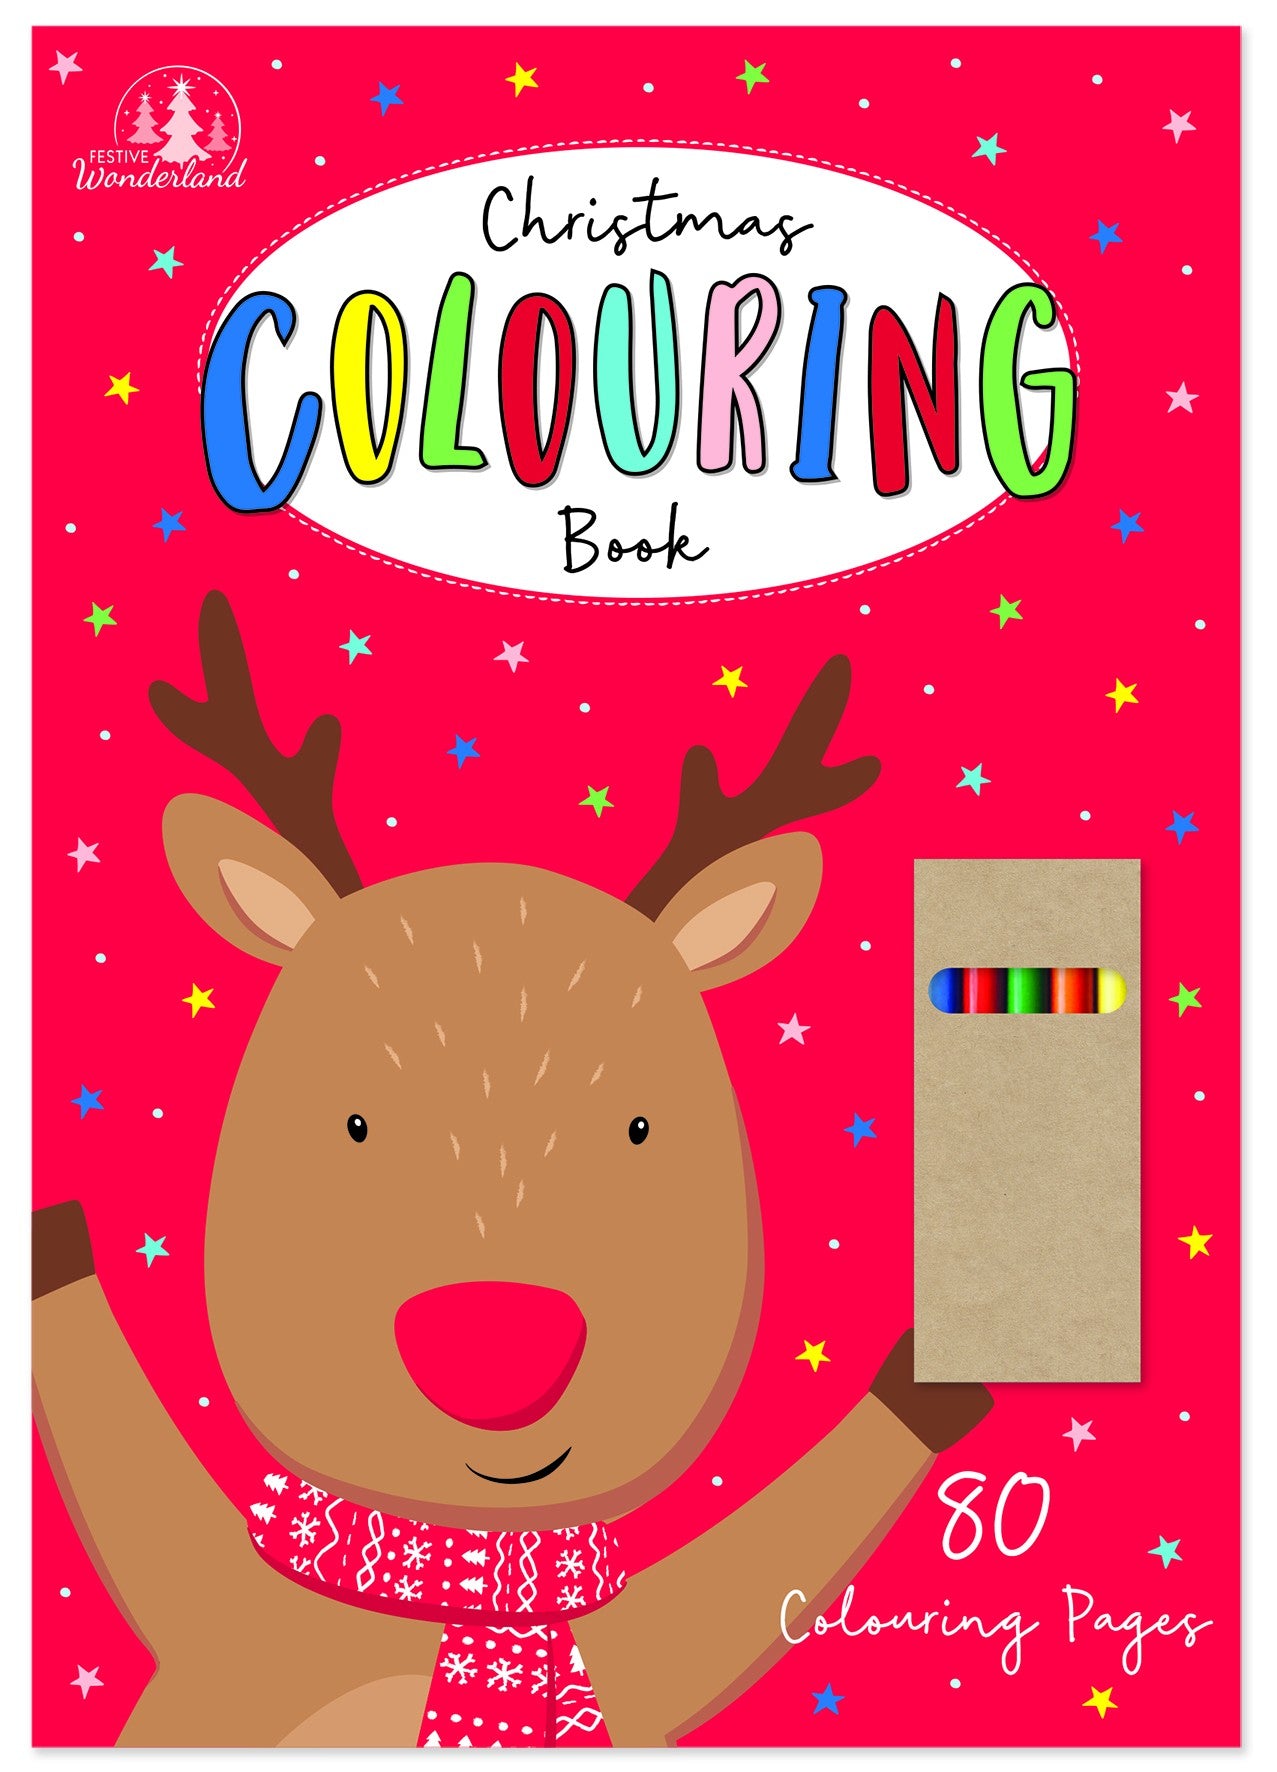 View Christmas Colouring Book information